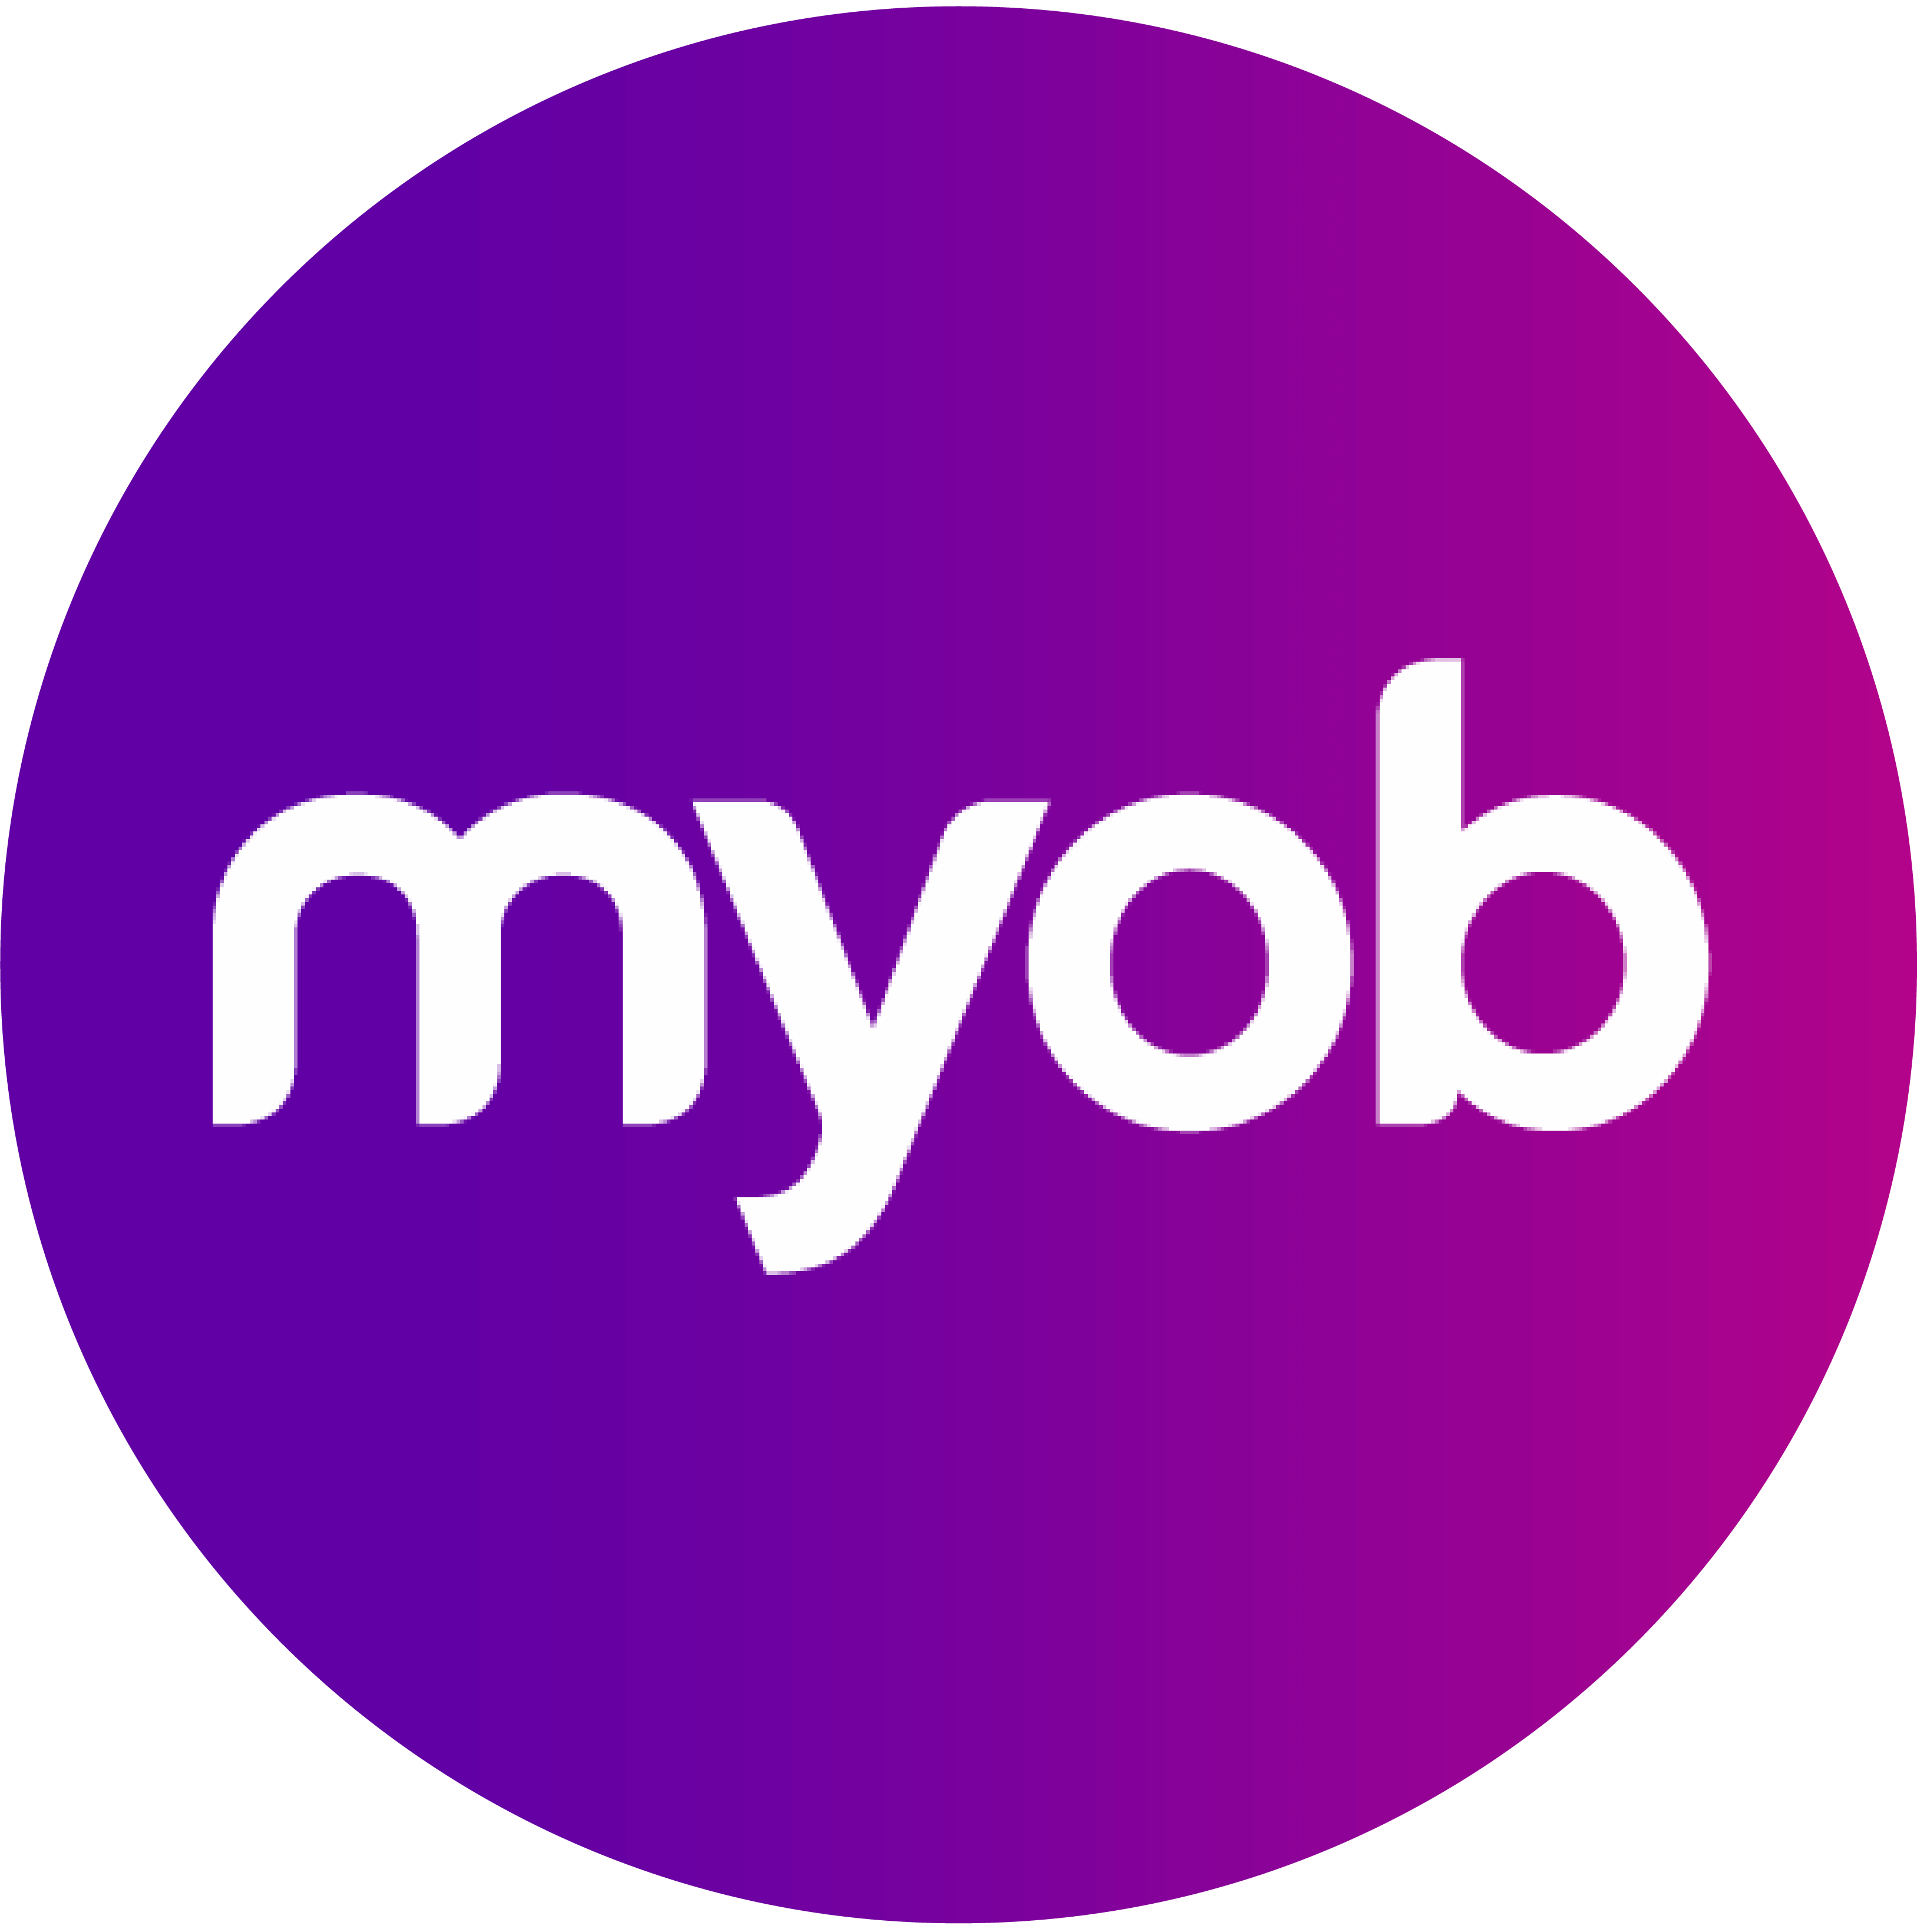 bookkeeping services - myob Software